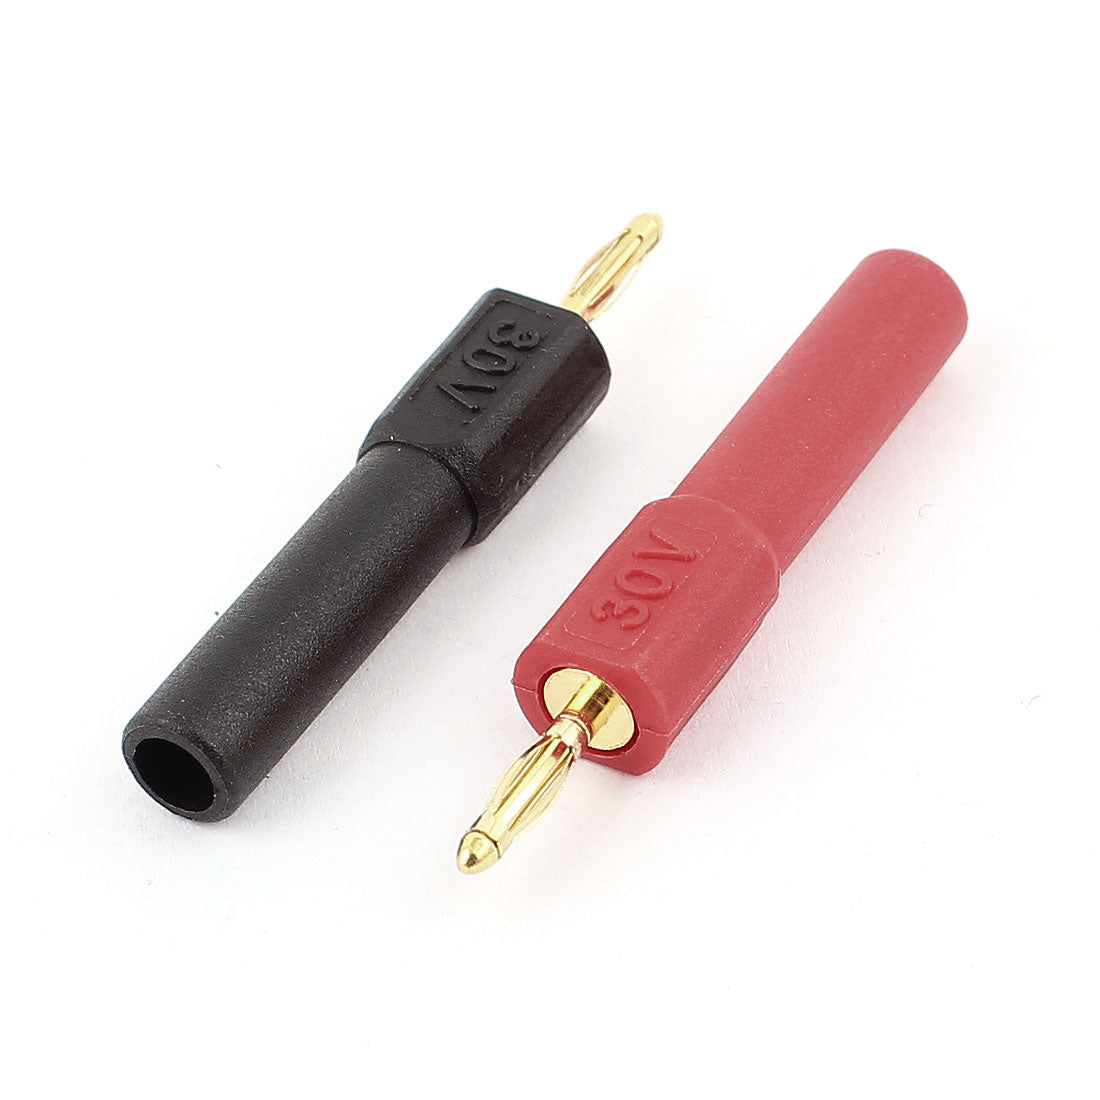 uxcell Uxcell 2PCS Gold Plated 2mm Male to 4mm Female Banana Jack Probes Adapters